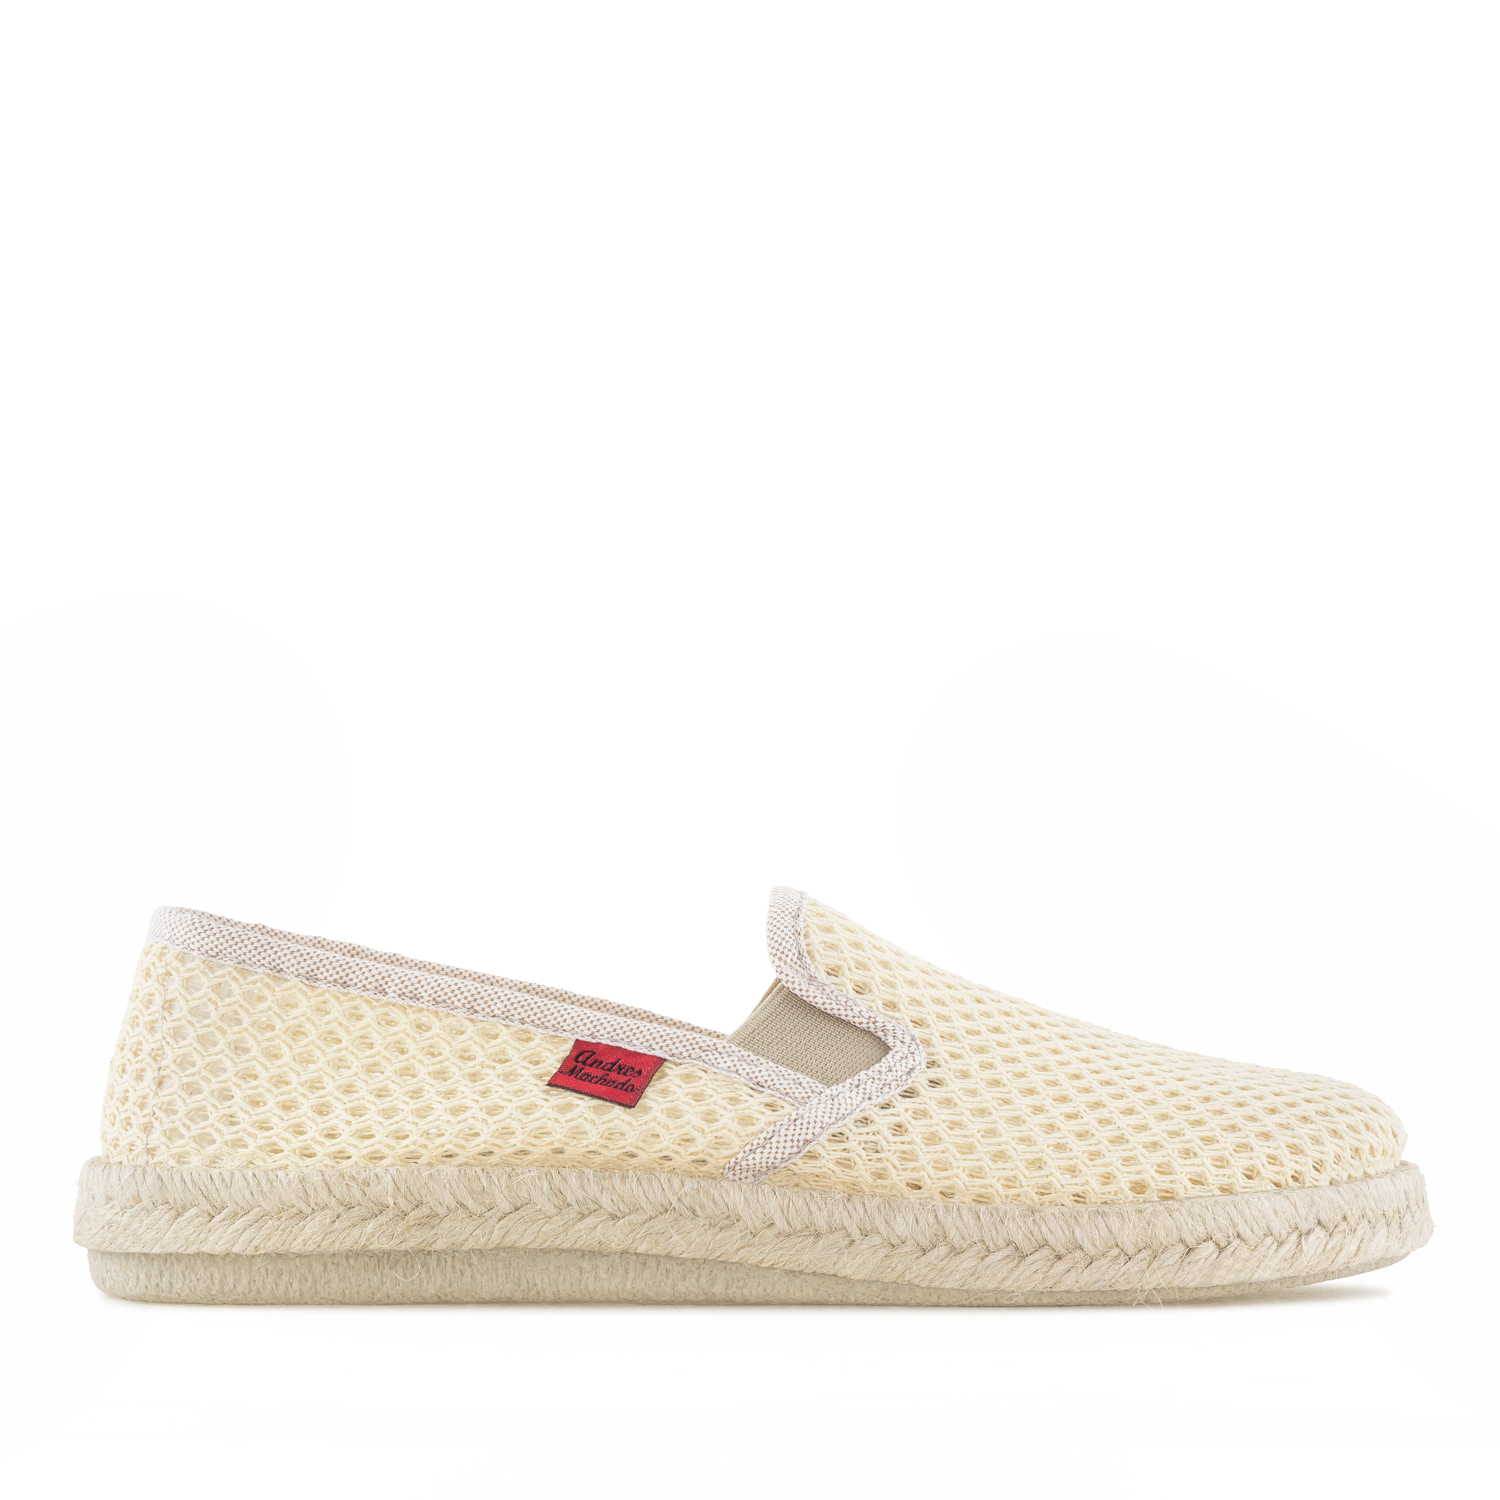 Mythical Beige Mesh Slip-On Shoes with Rubber and Jute Sole 